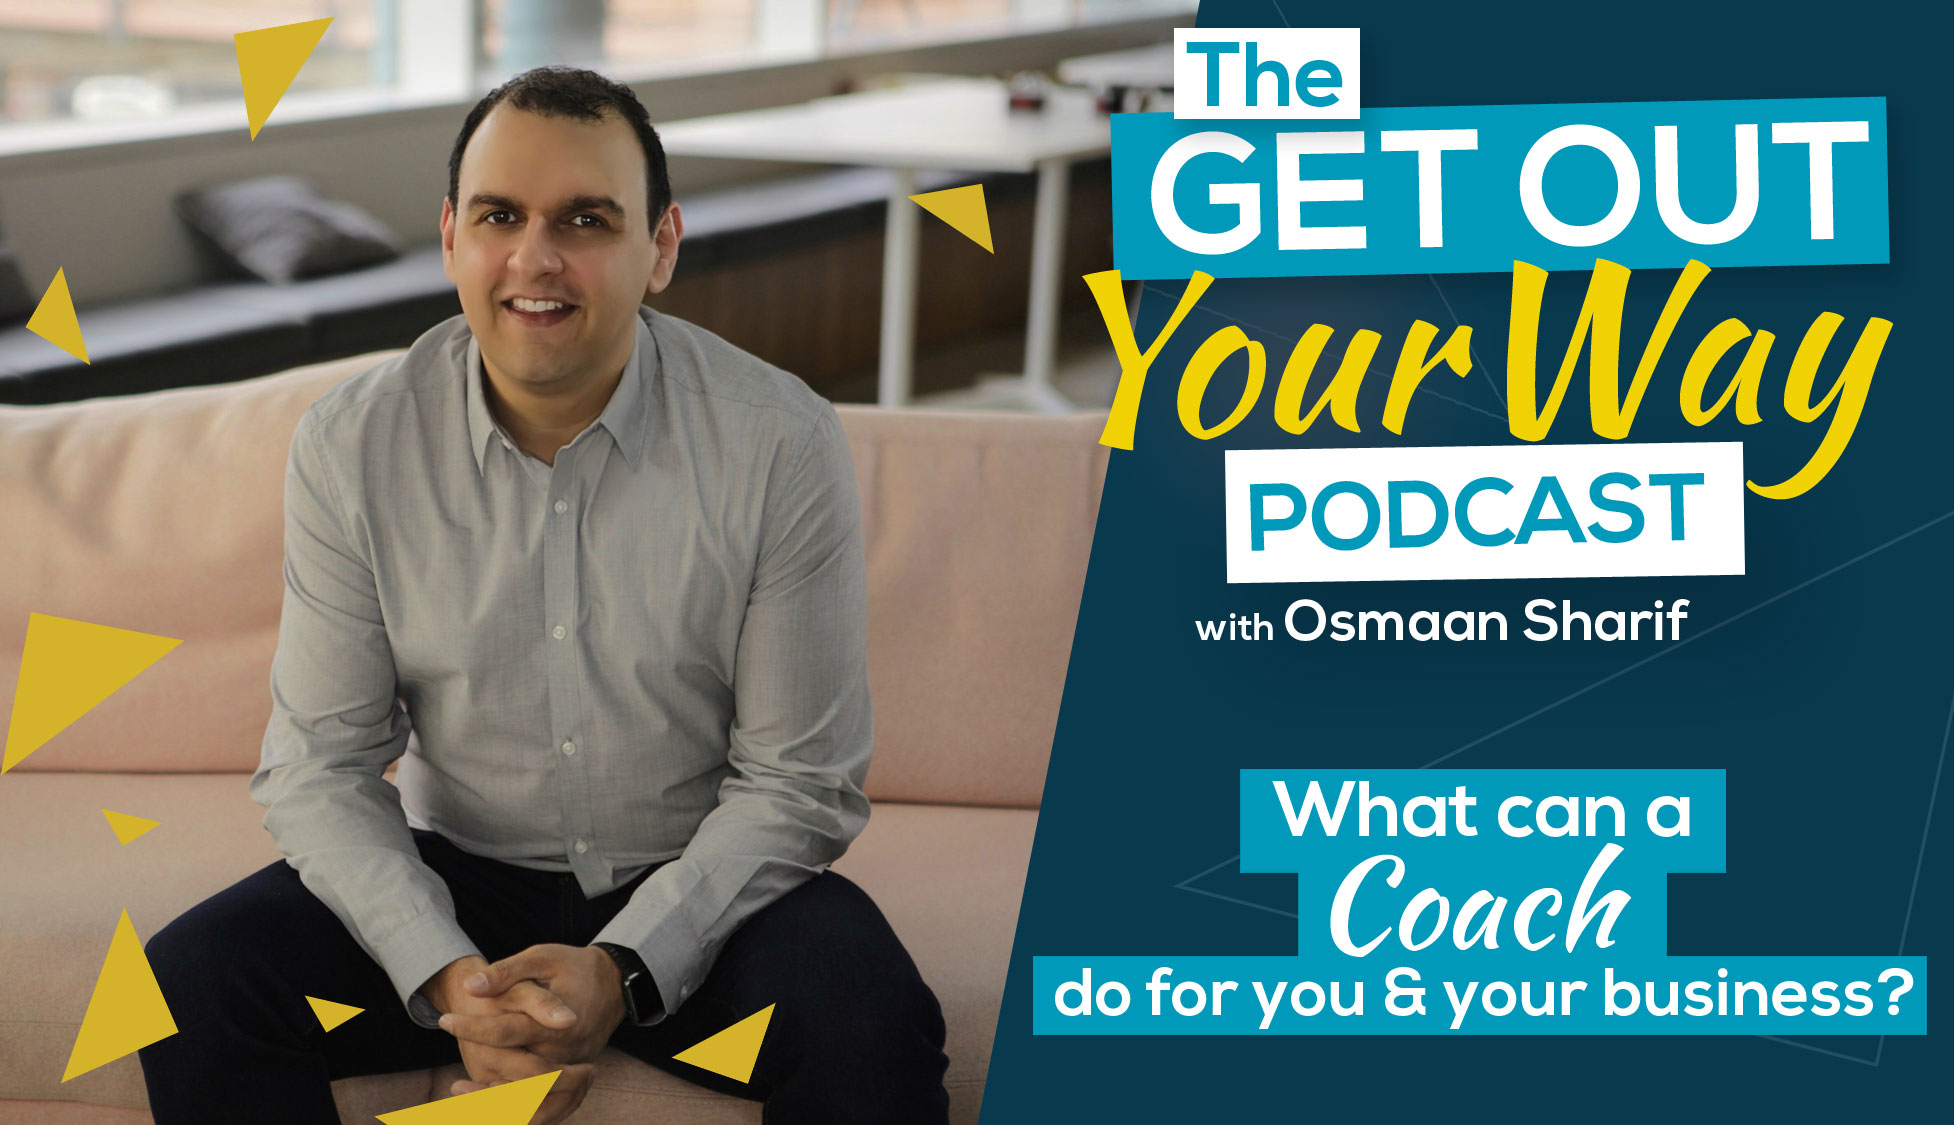 What can a coach for you & your business?